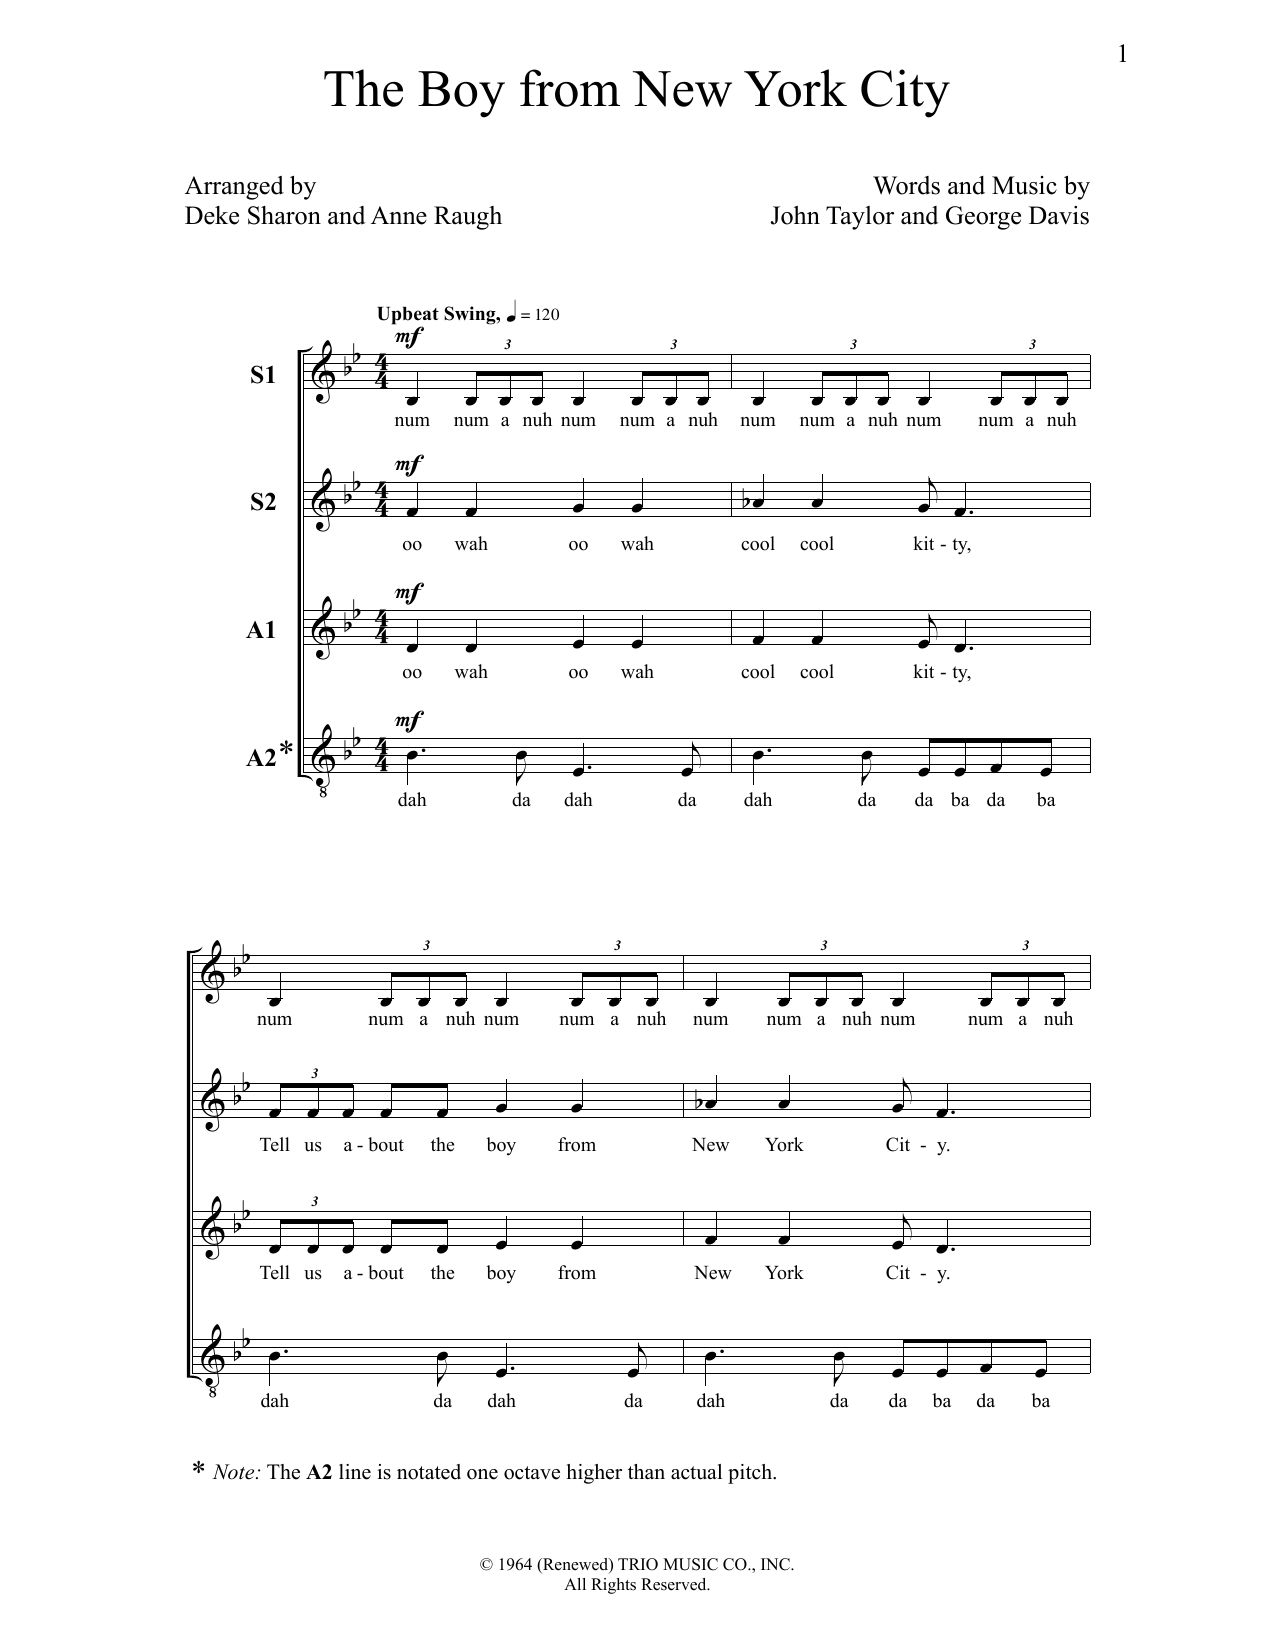 Deke Sharon The Boy From New York City sheet music notes and chords. Download Printable PDF.